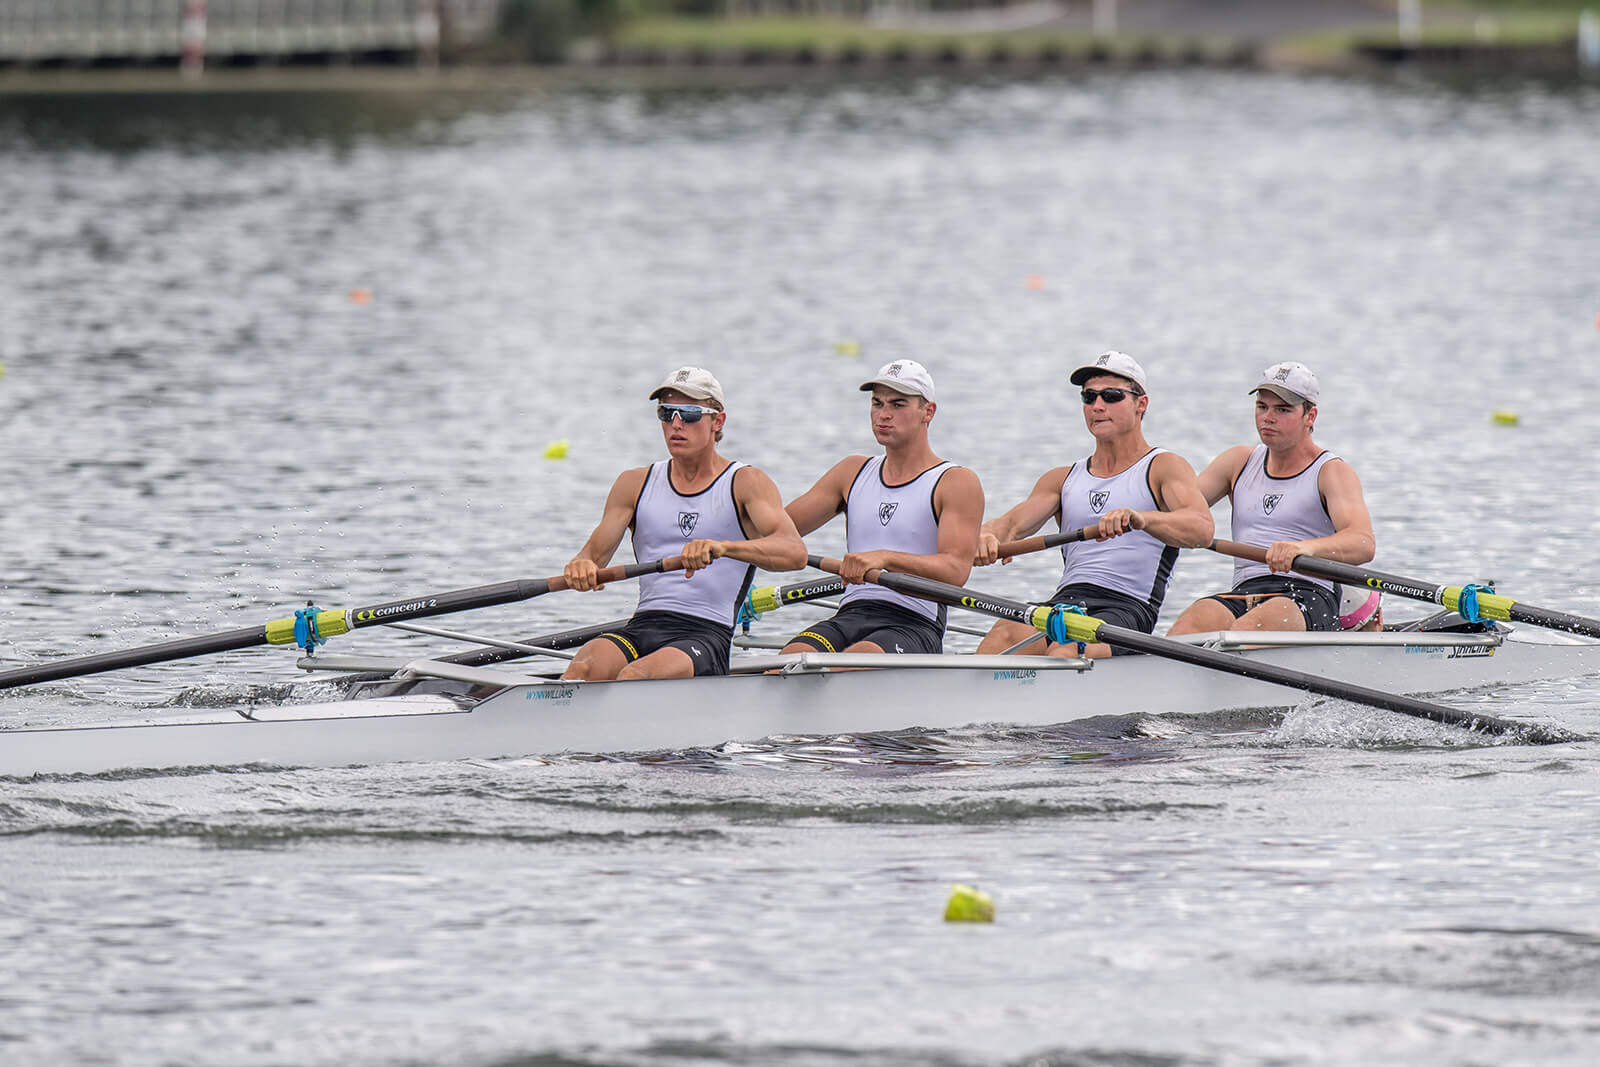 There are four young men racing an SL Racing coxless four rowing boat on the river. They have black oars and are rowing in sync, wearing white tops and white caps.